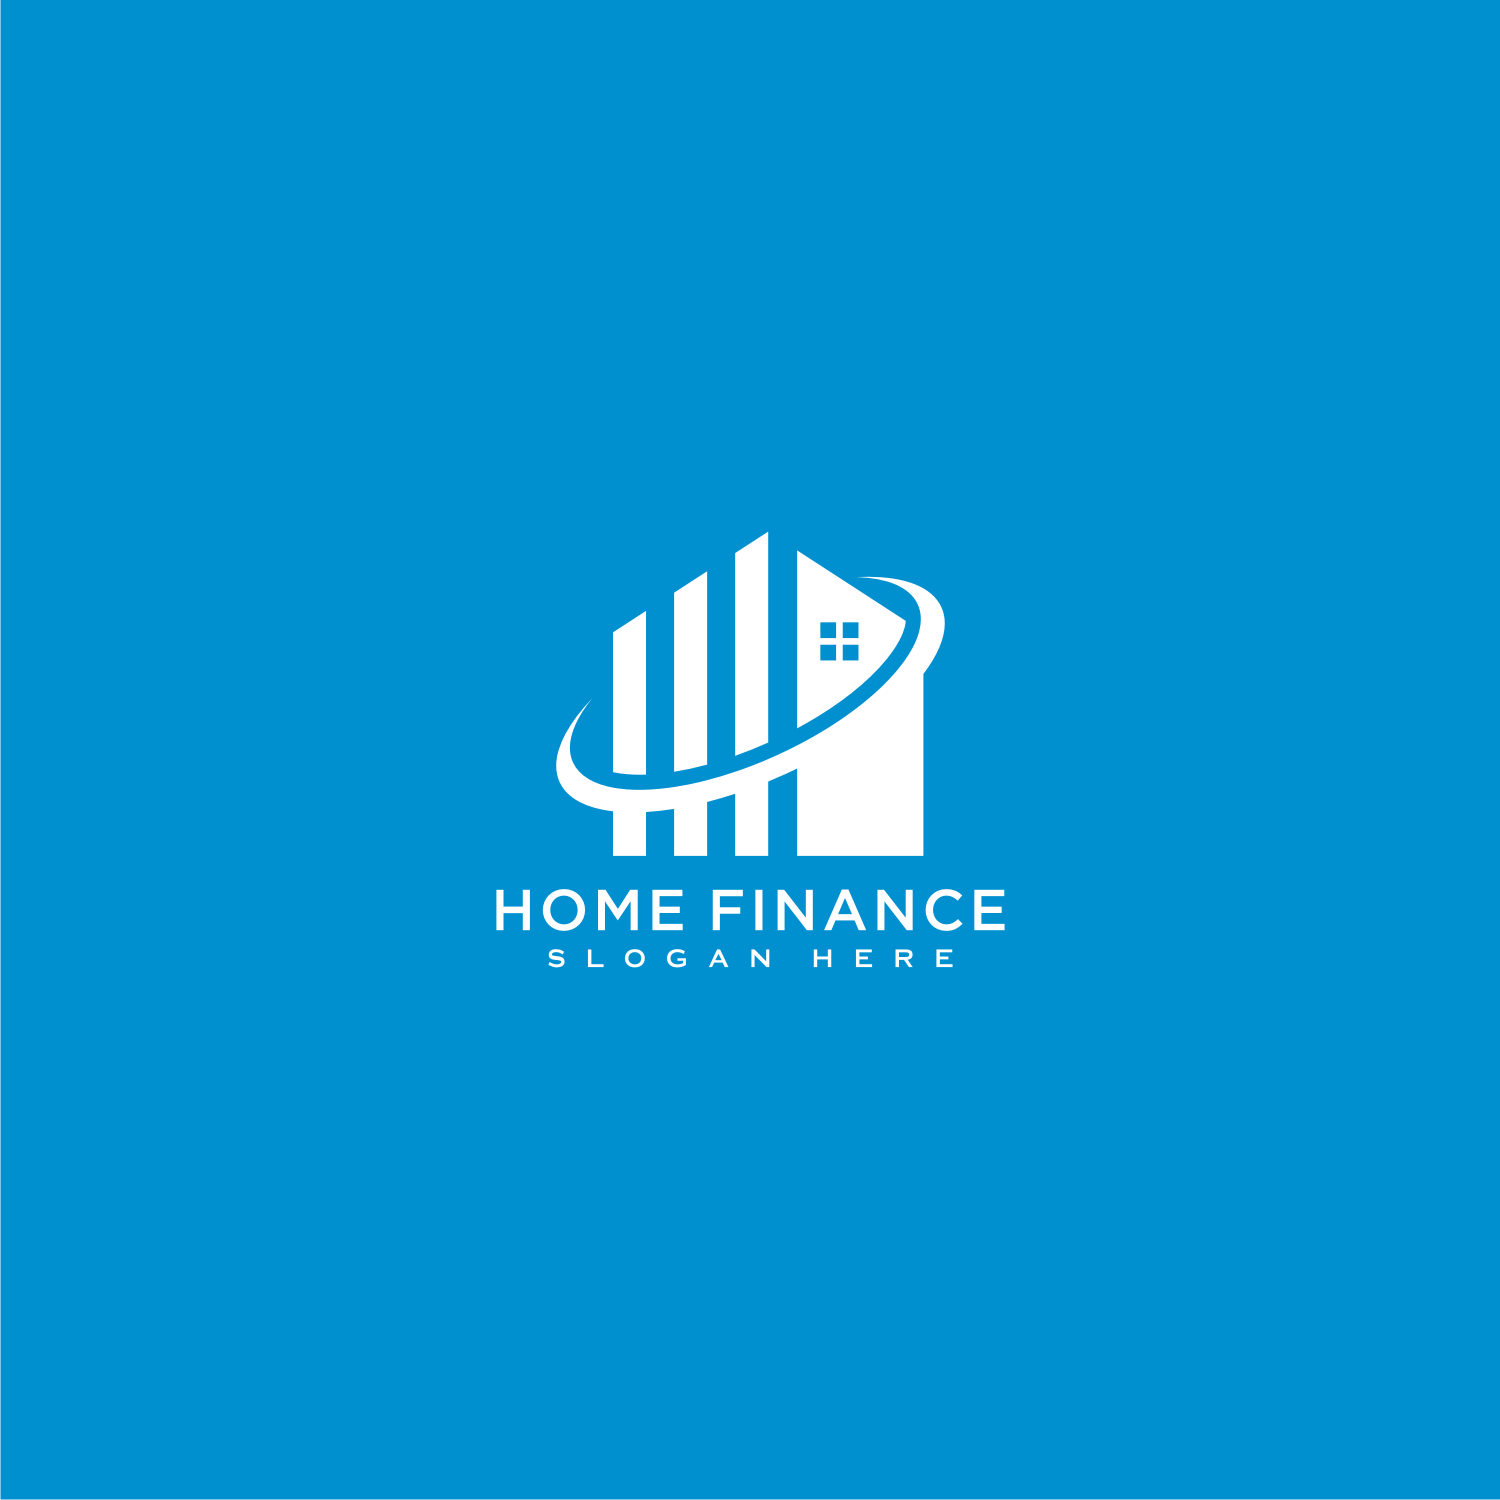 House and Business Finance Logo cover image.